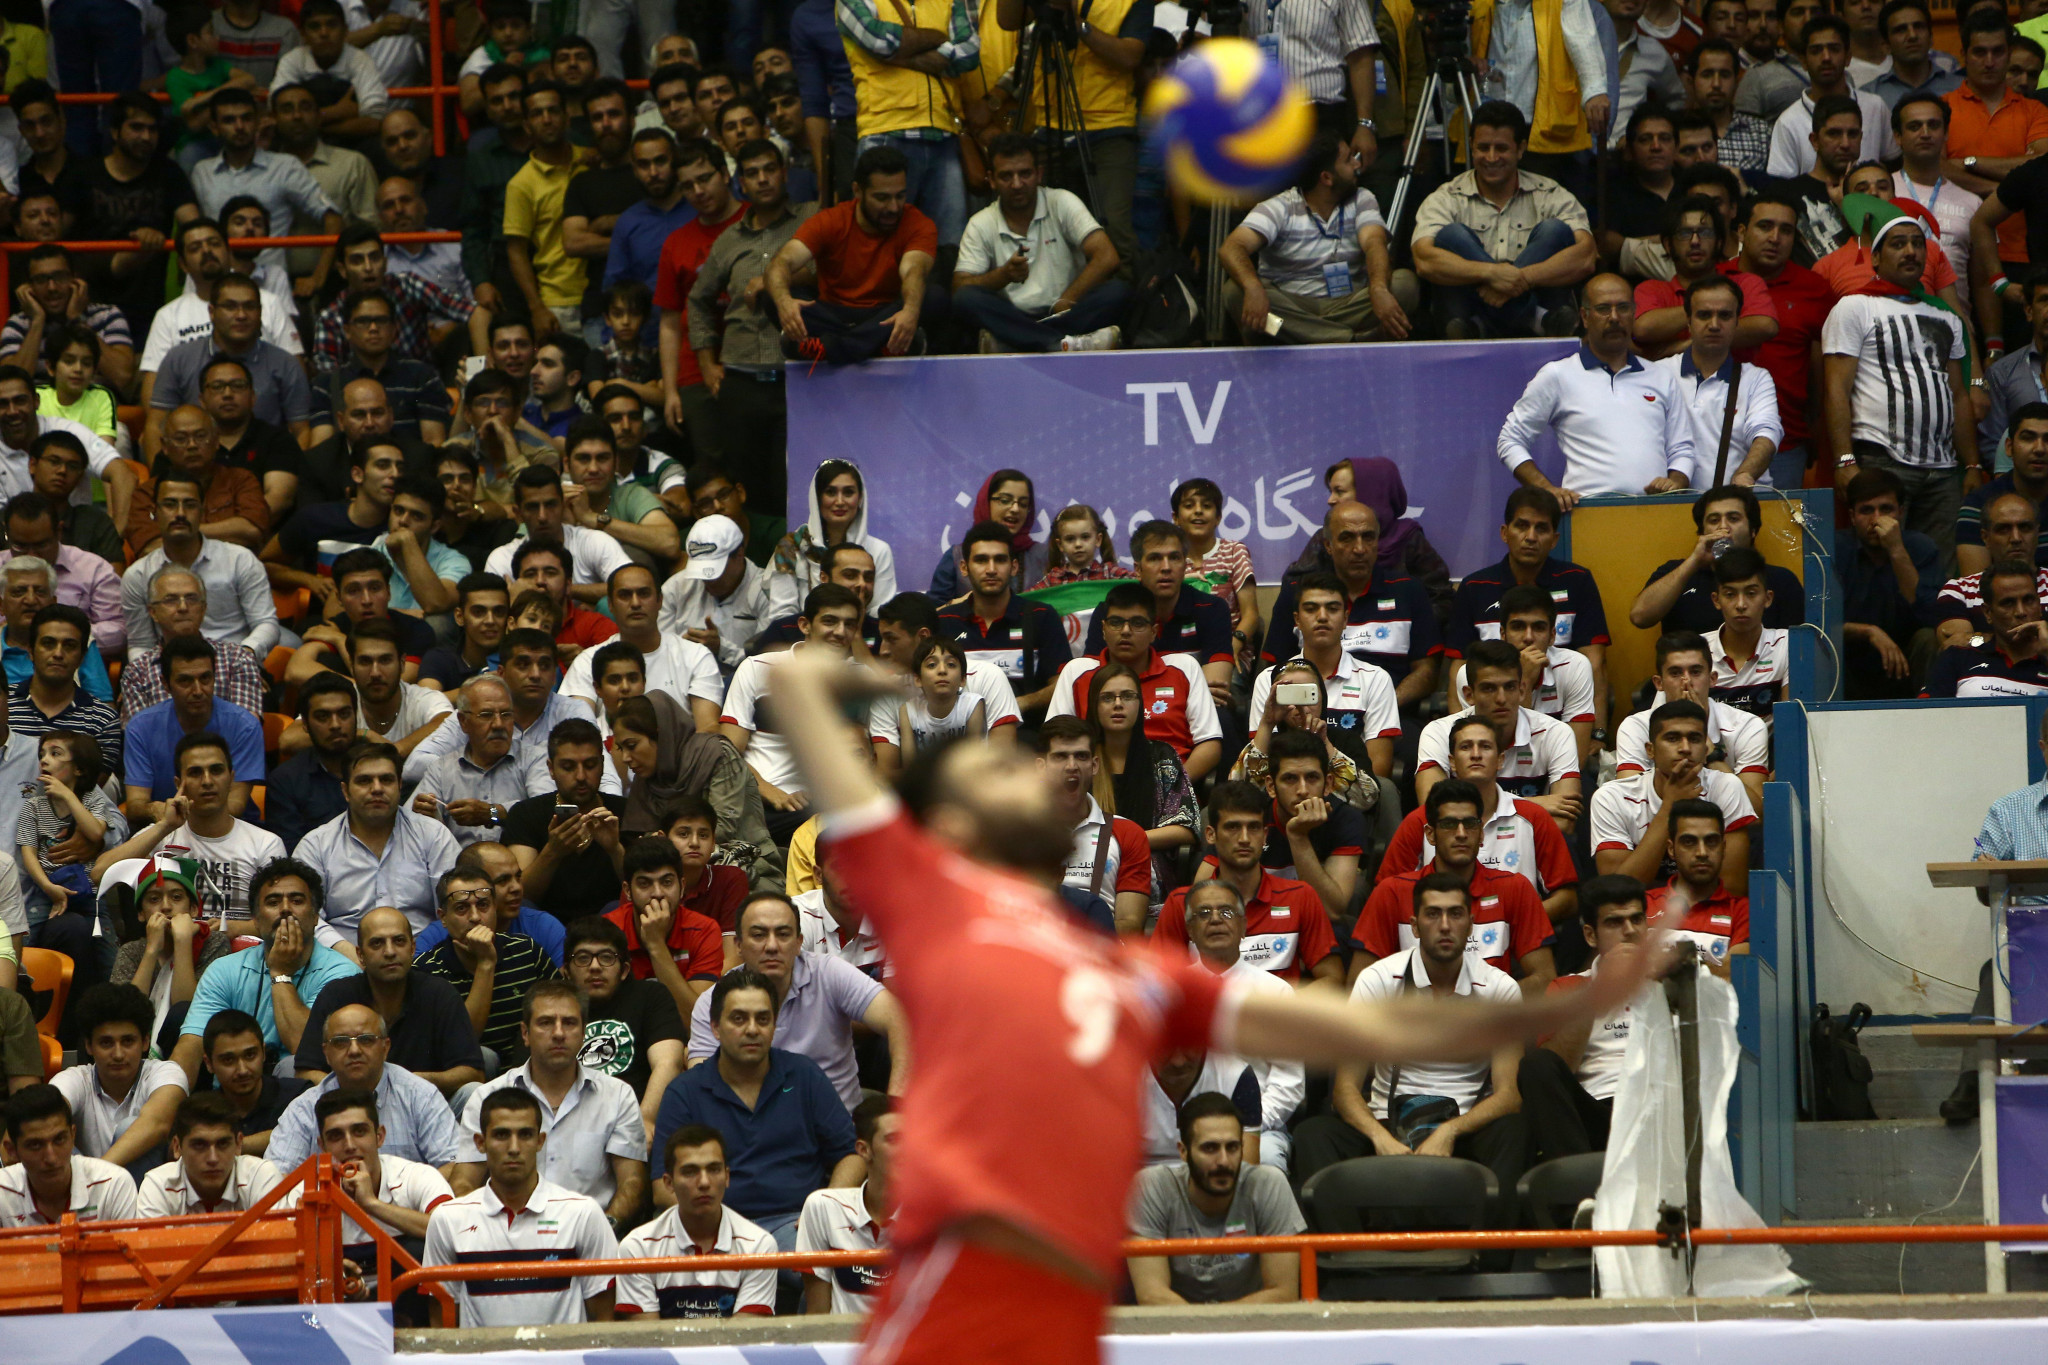 Only a limited number of pre-vetted women are allowed to attend volleyball matches in Iran ©Getty Images